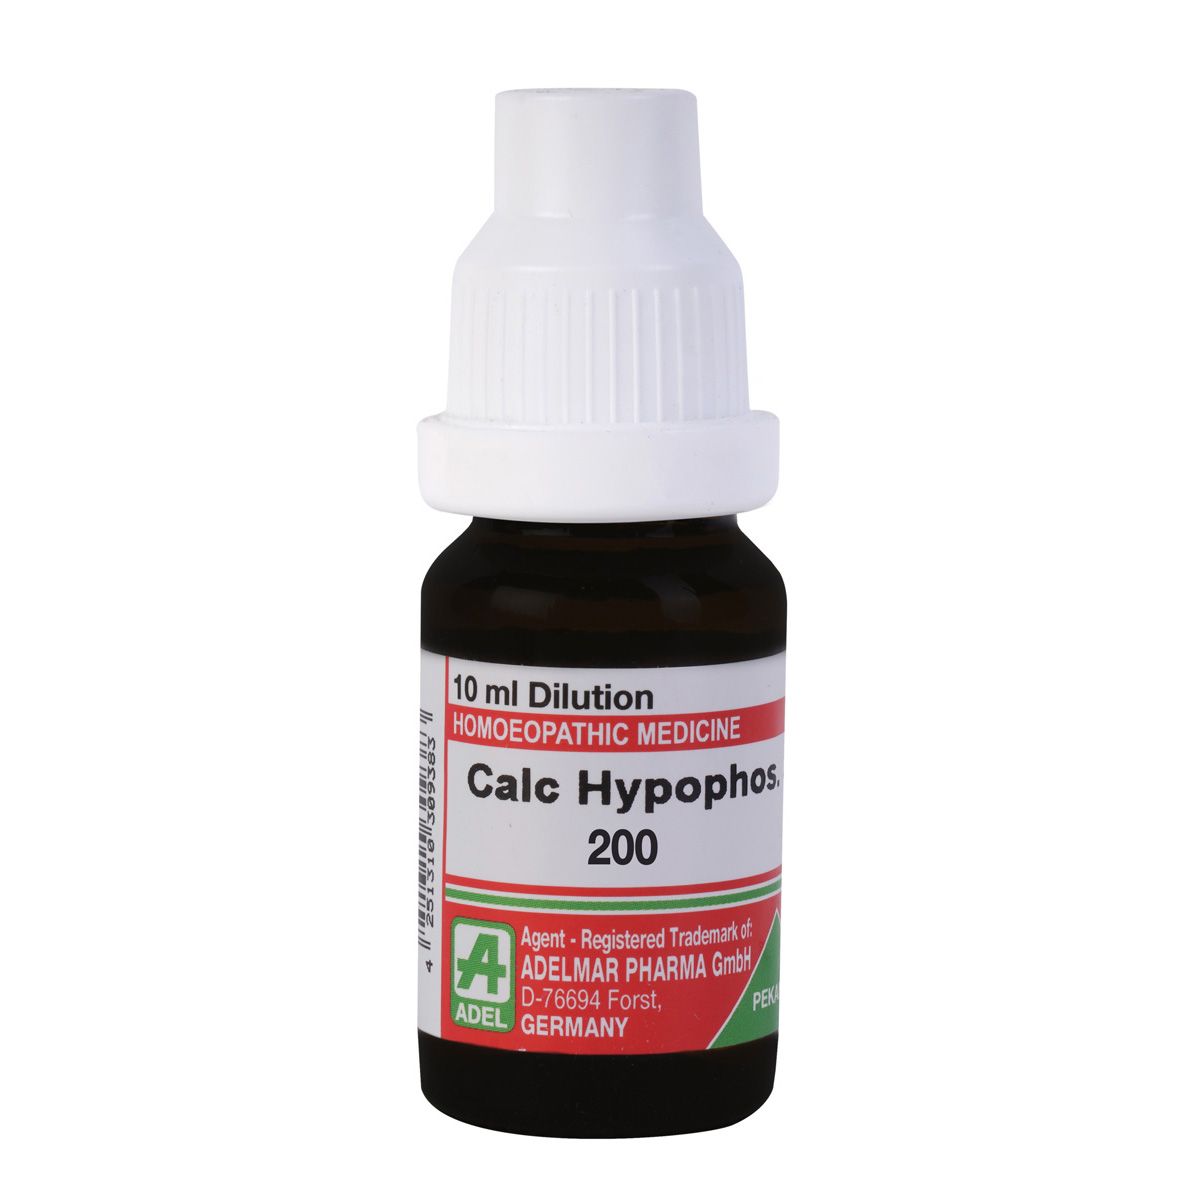 Picture of ADEL Calc Hypophos Dilution - 10 ml